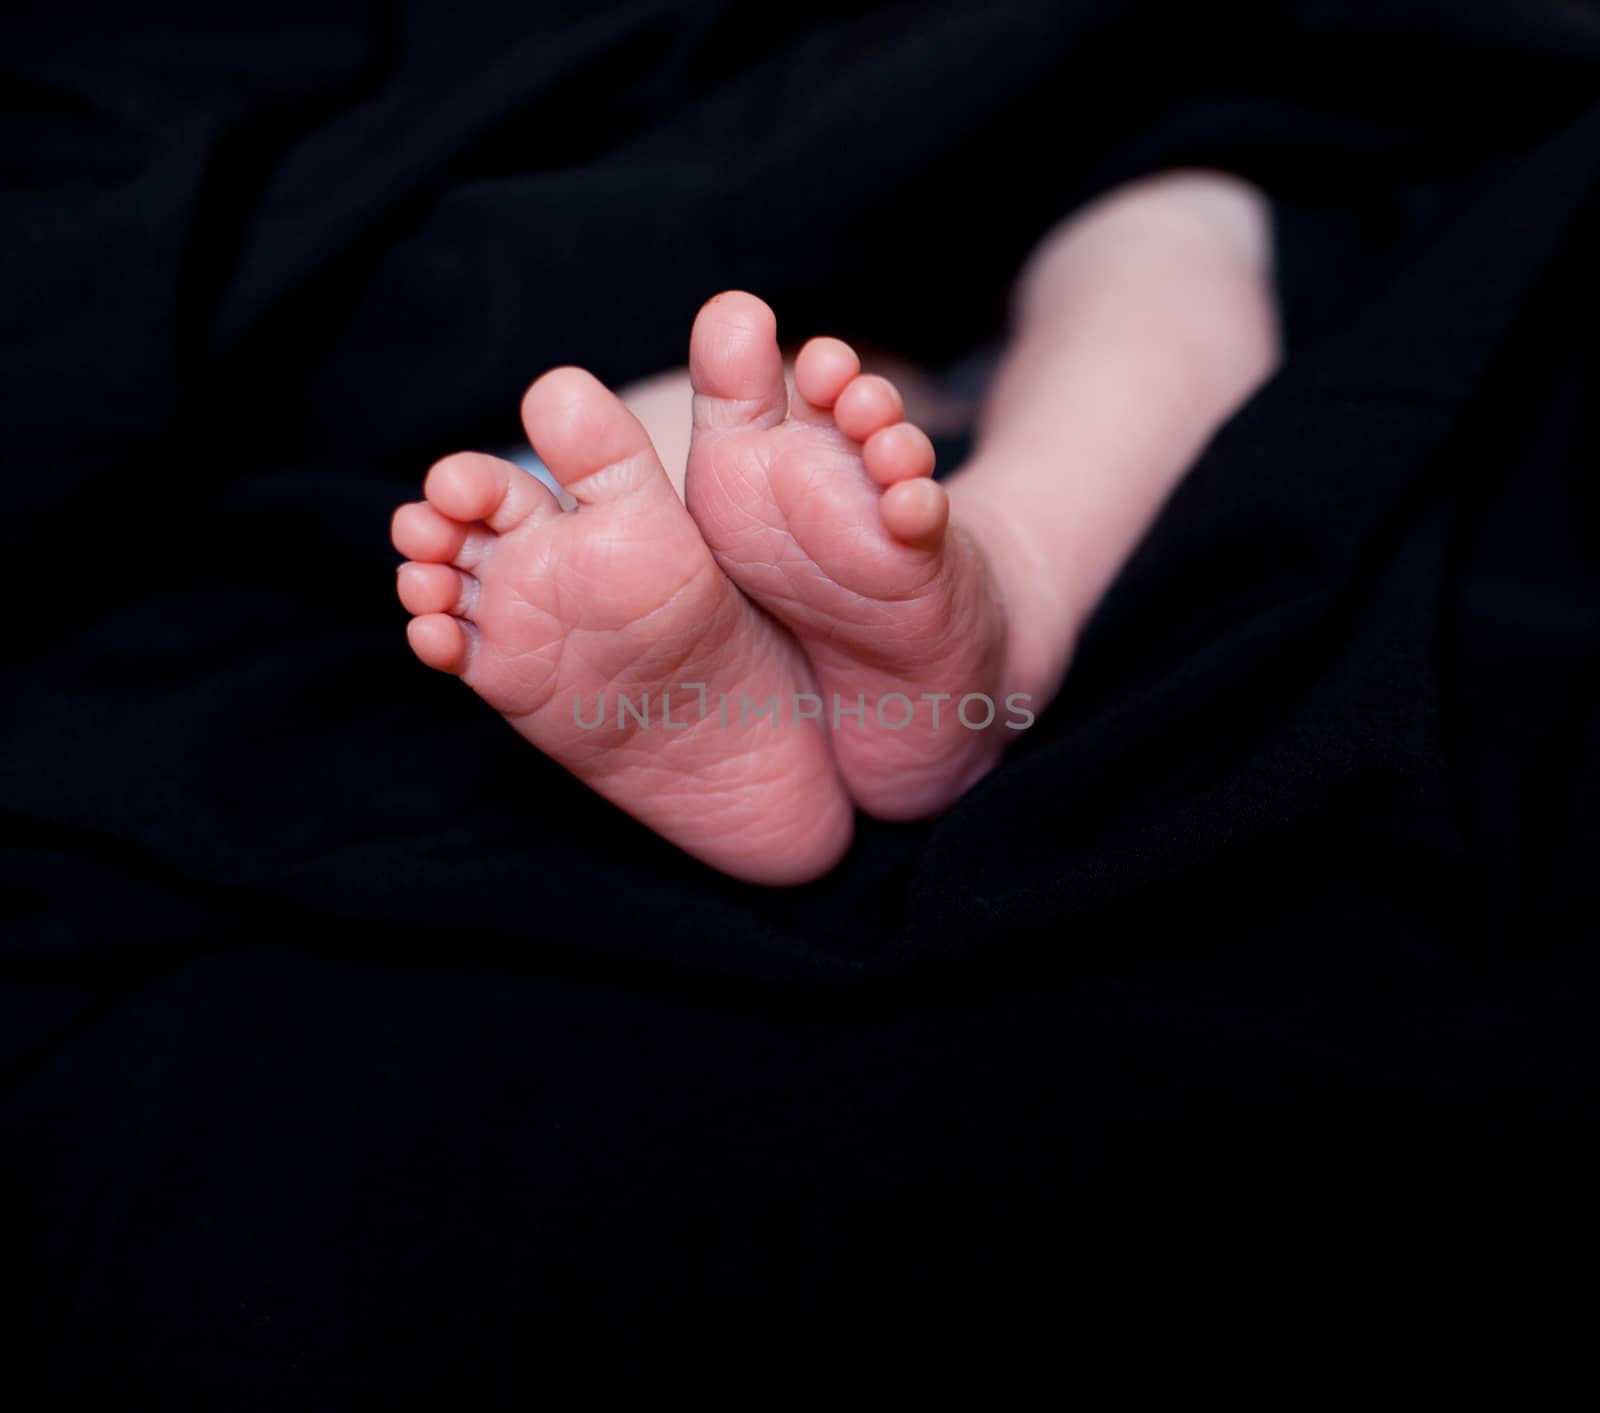 Newborn 11 days young baby feet. Isolated on black.